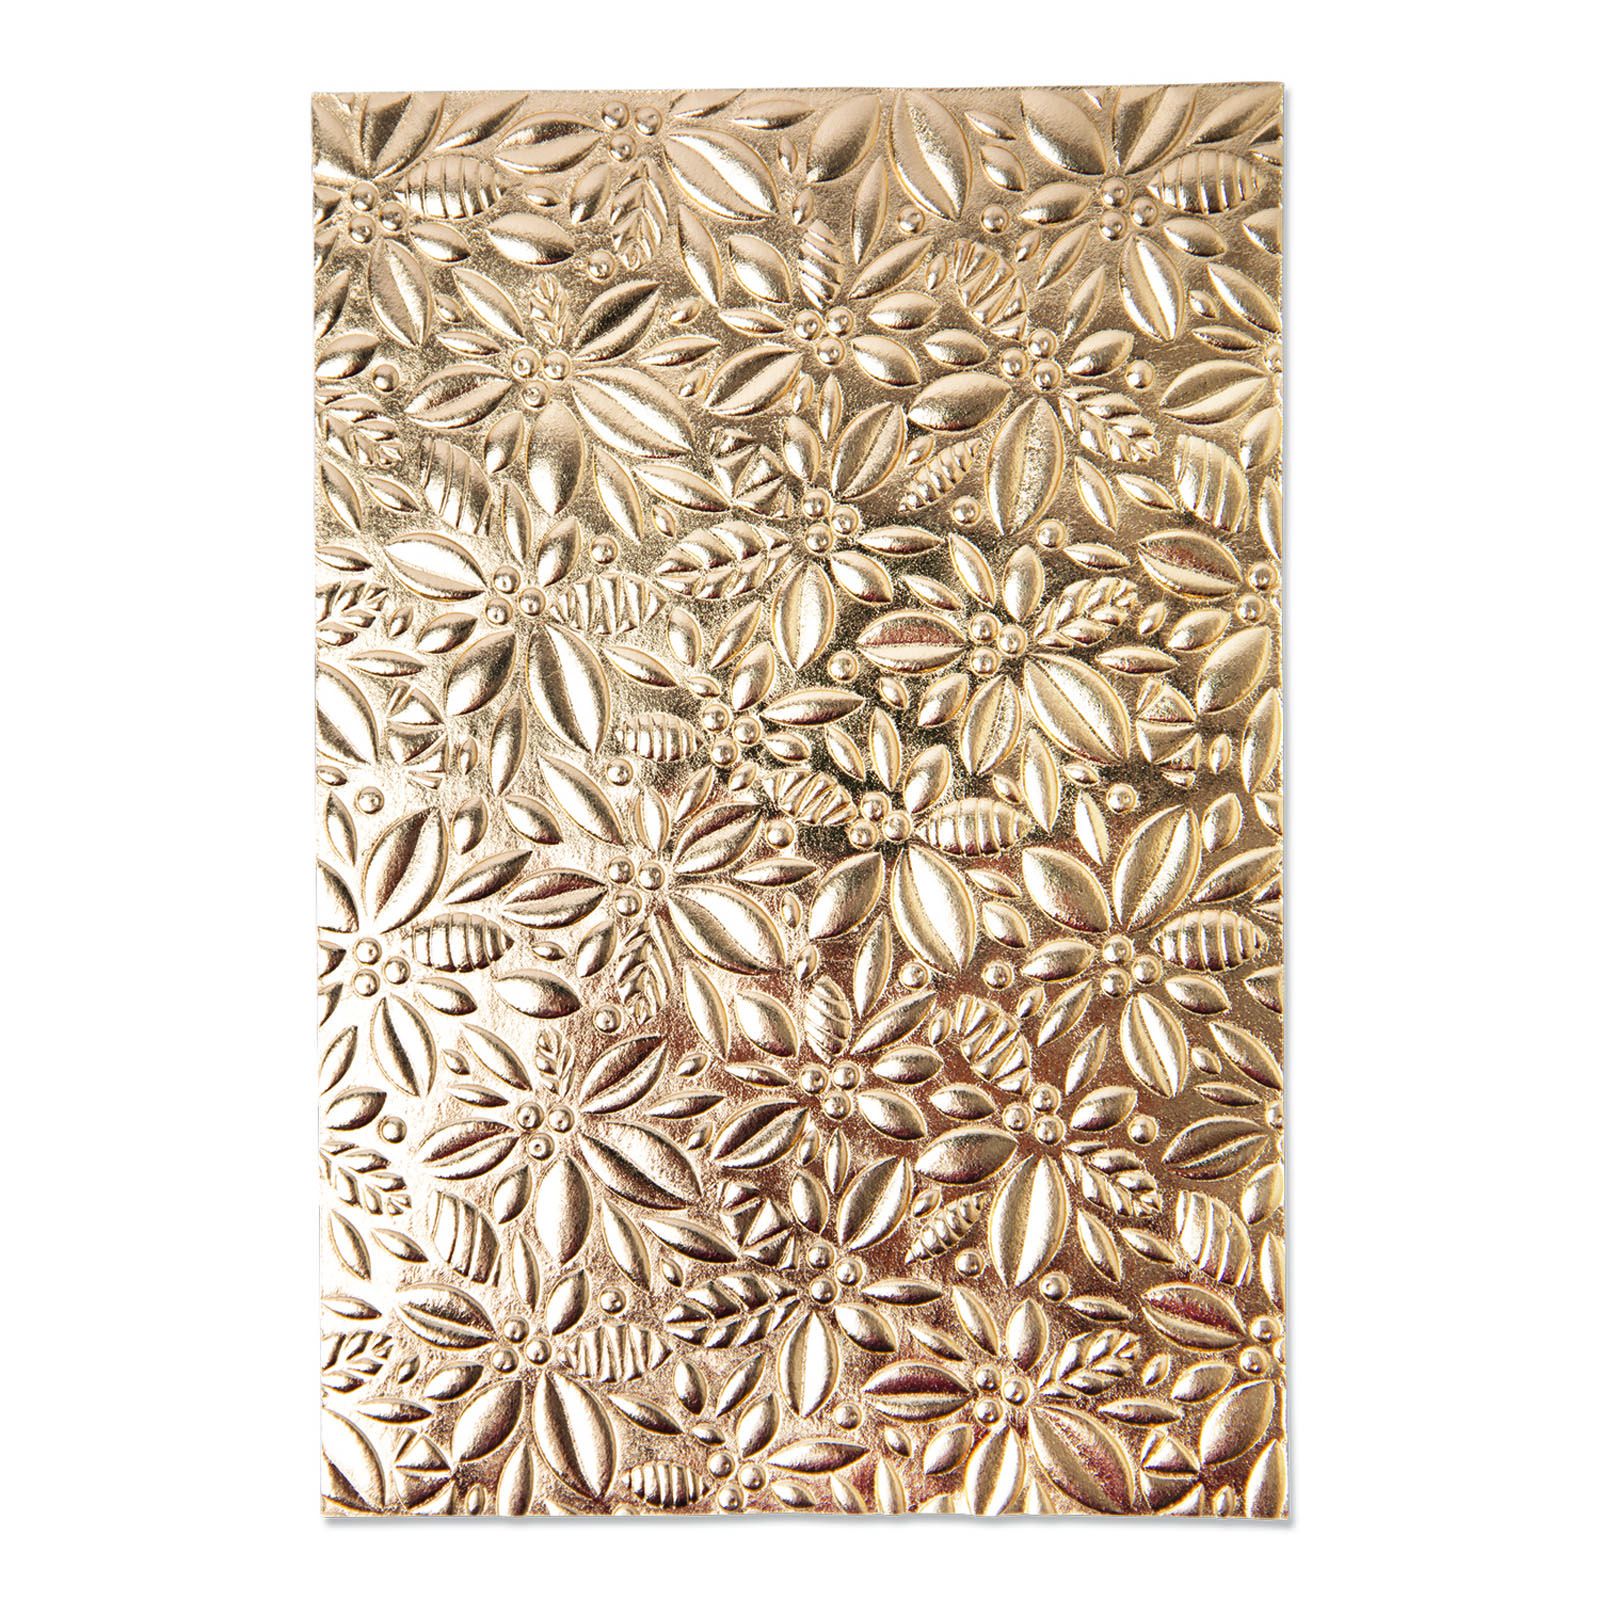 Sizzix • 3D textured impressions embossing folder Holly